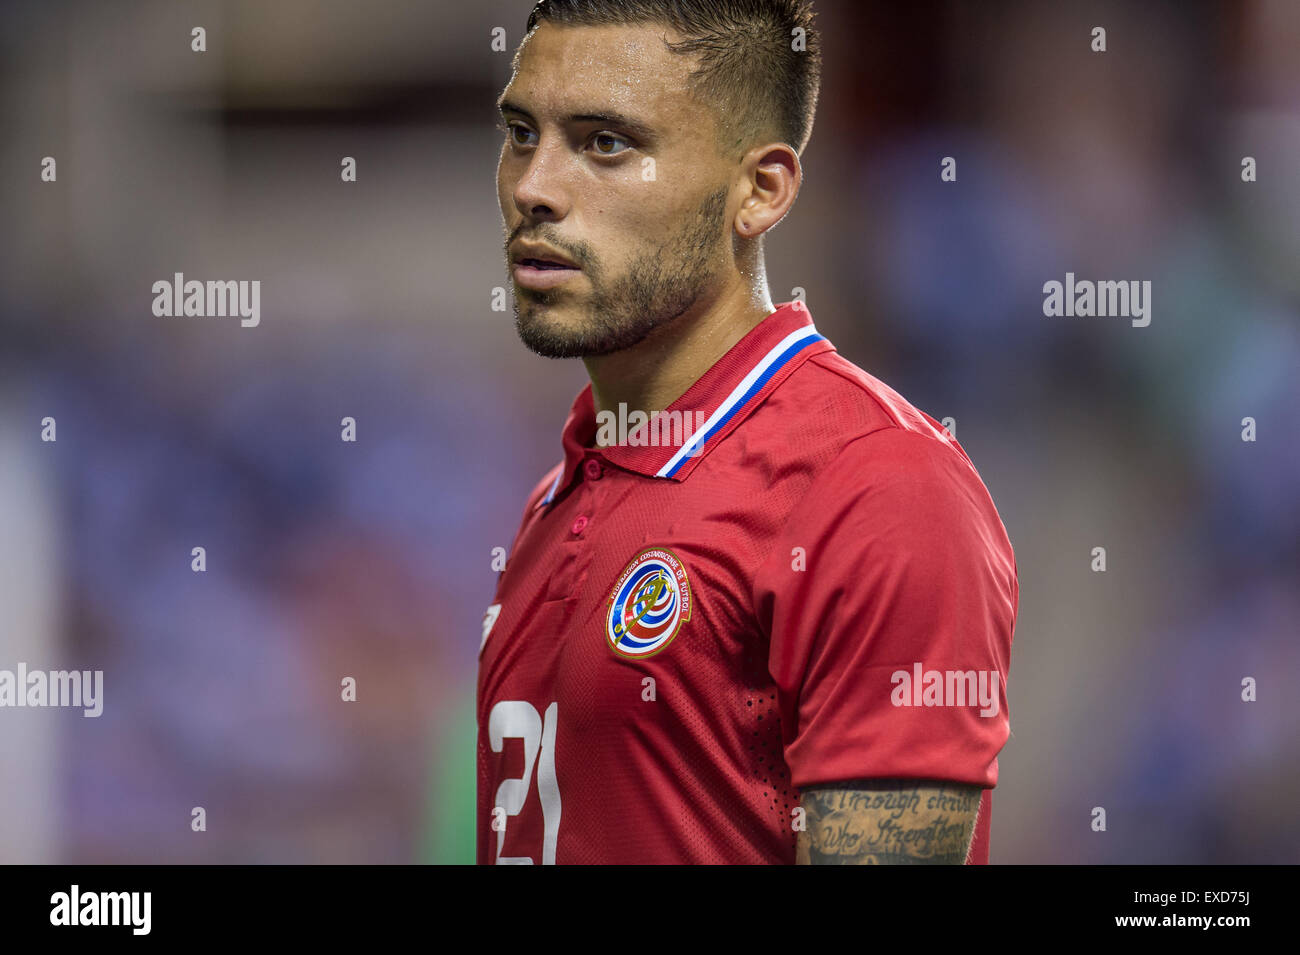 Houston, Texas, USA. 11th July, 2015. Costa Rica forward David Ramirez (21)  looks on during the 2nd half of an international CONCACAF Gold Cup soccer  match between Costa Rica and El Salvador